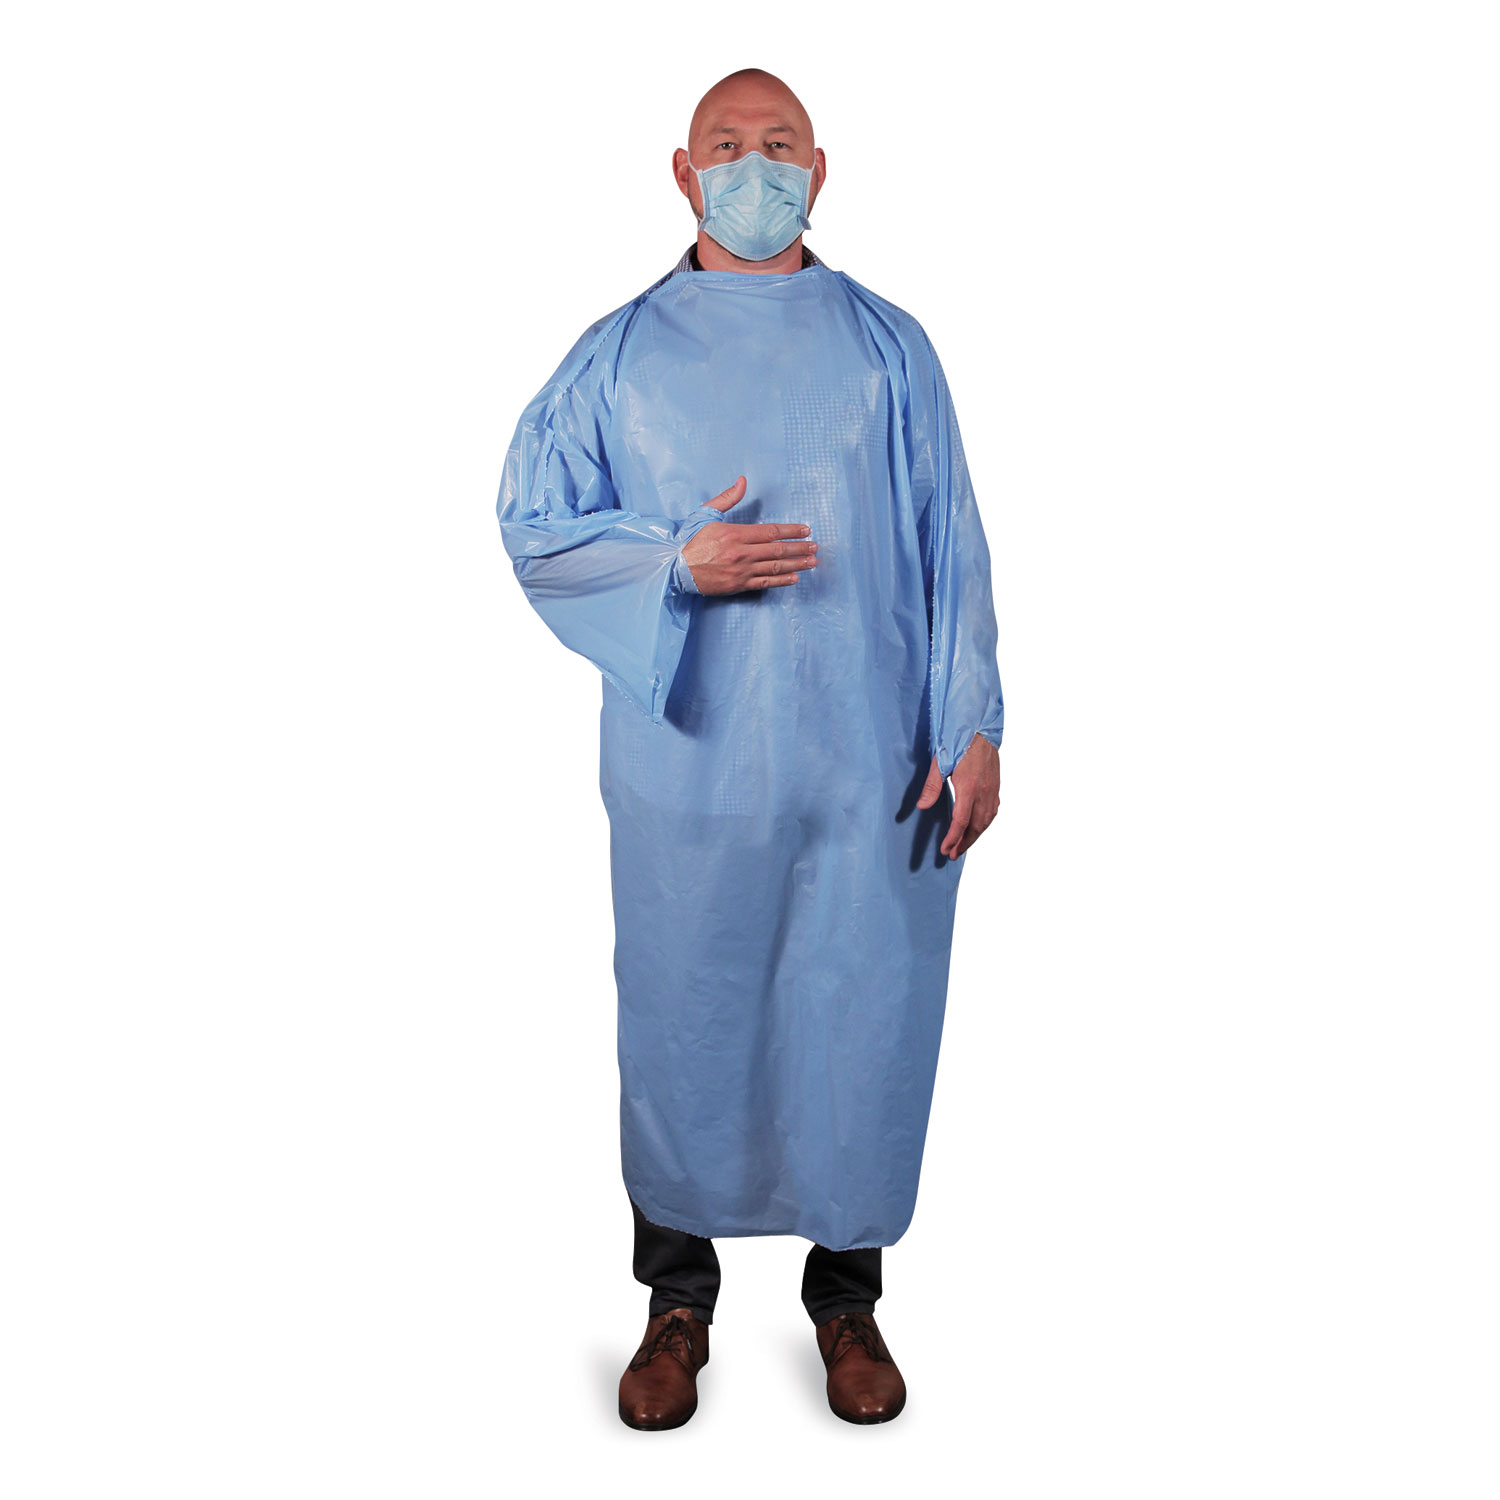 Heritage T-Style Isolation Gown, LLDPE, Large, Light Blue, 50/Carton